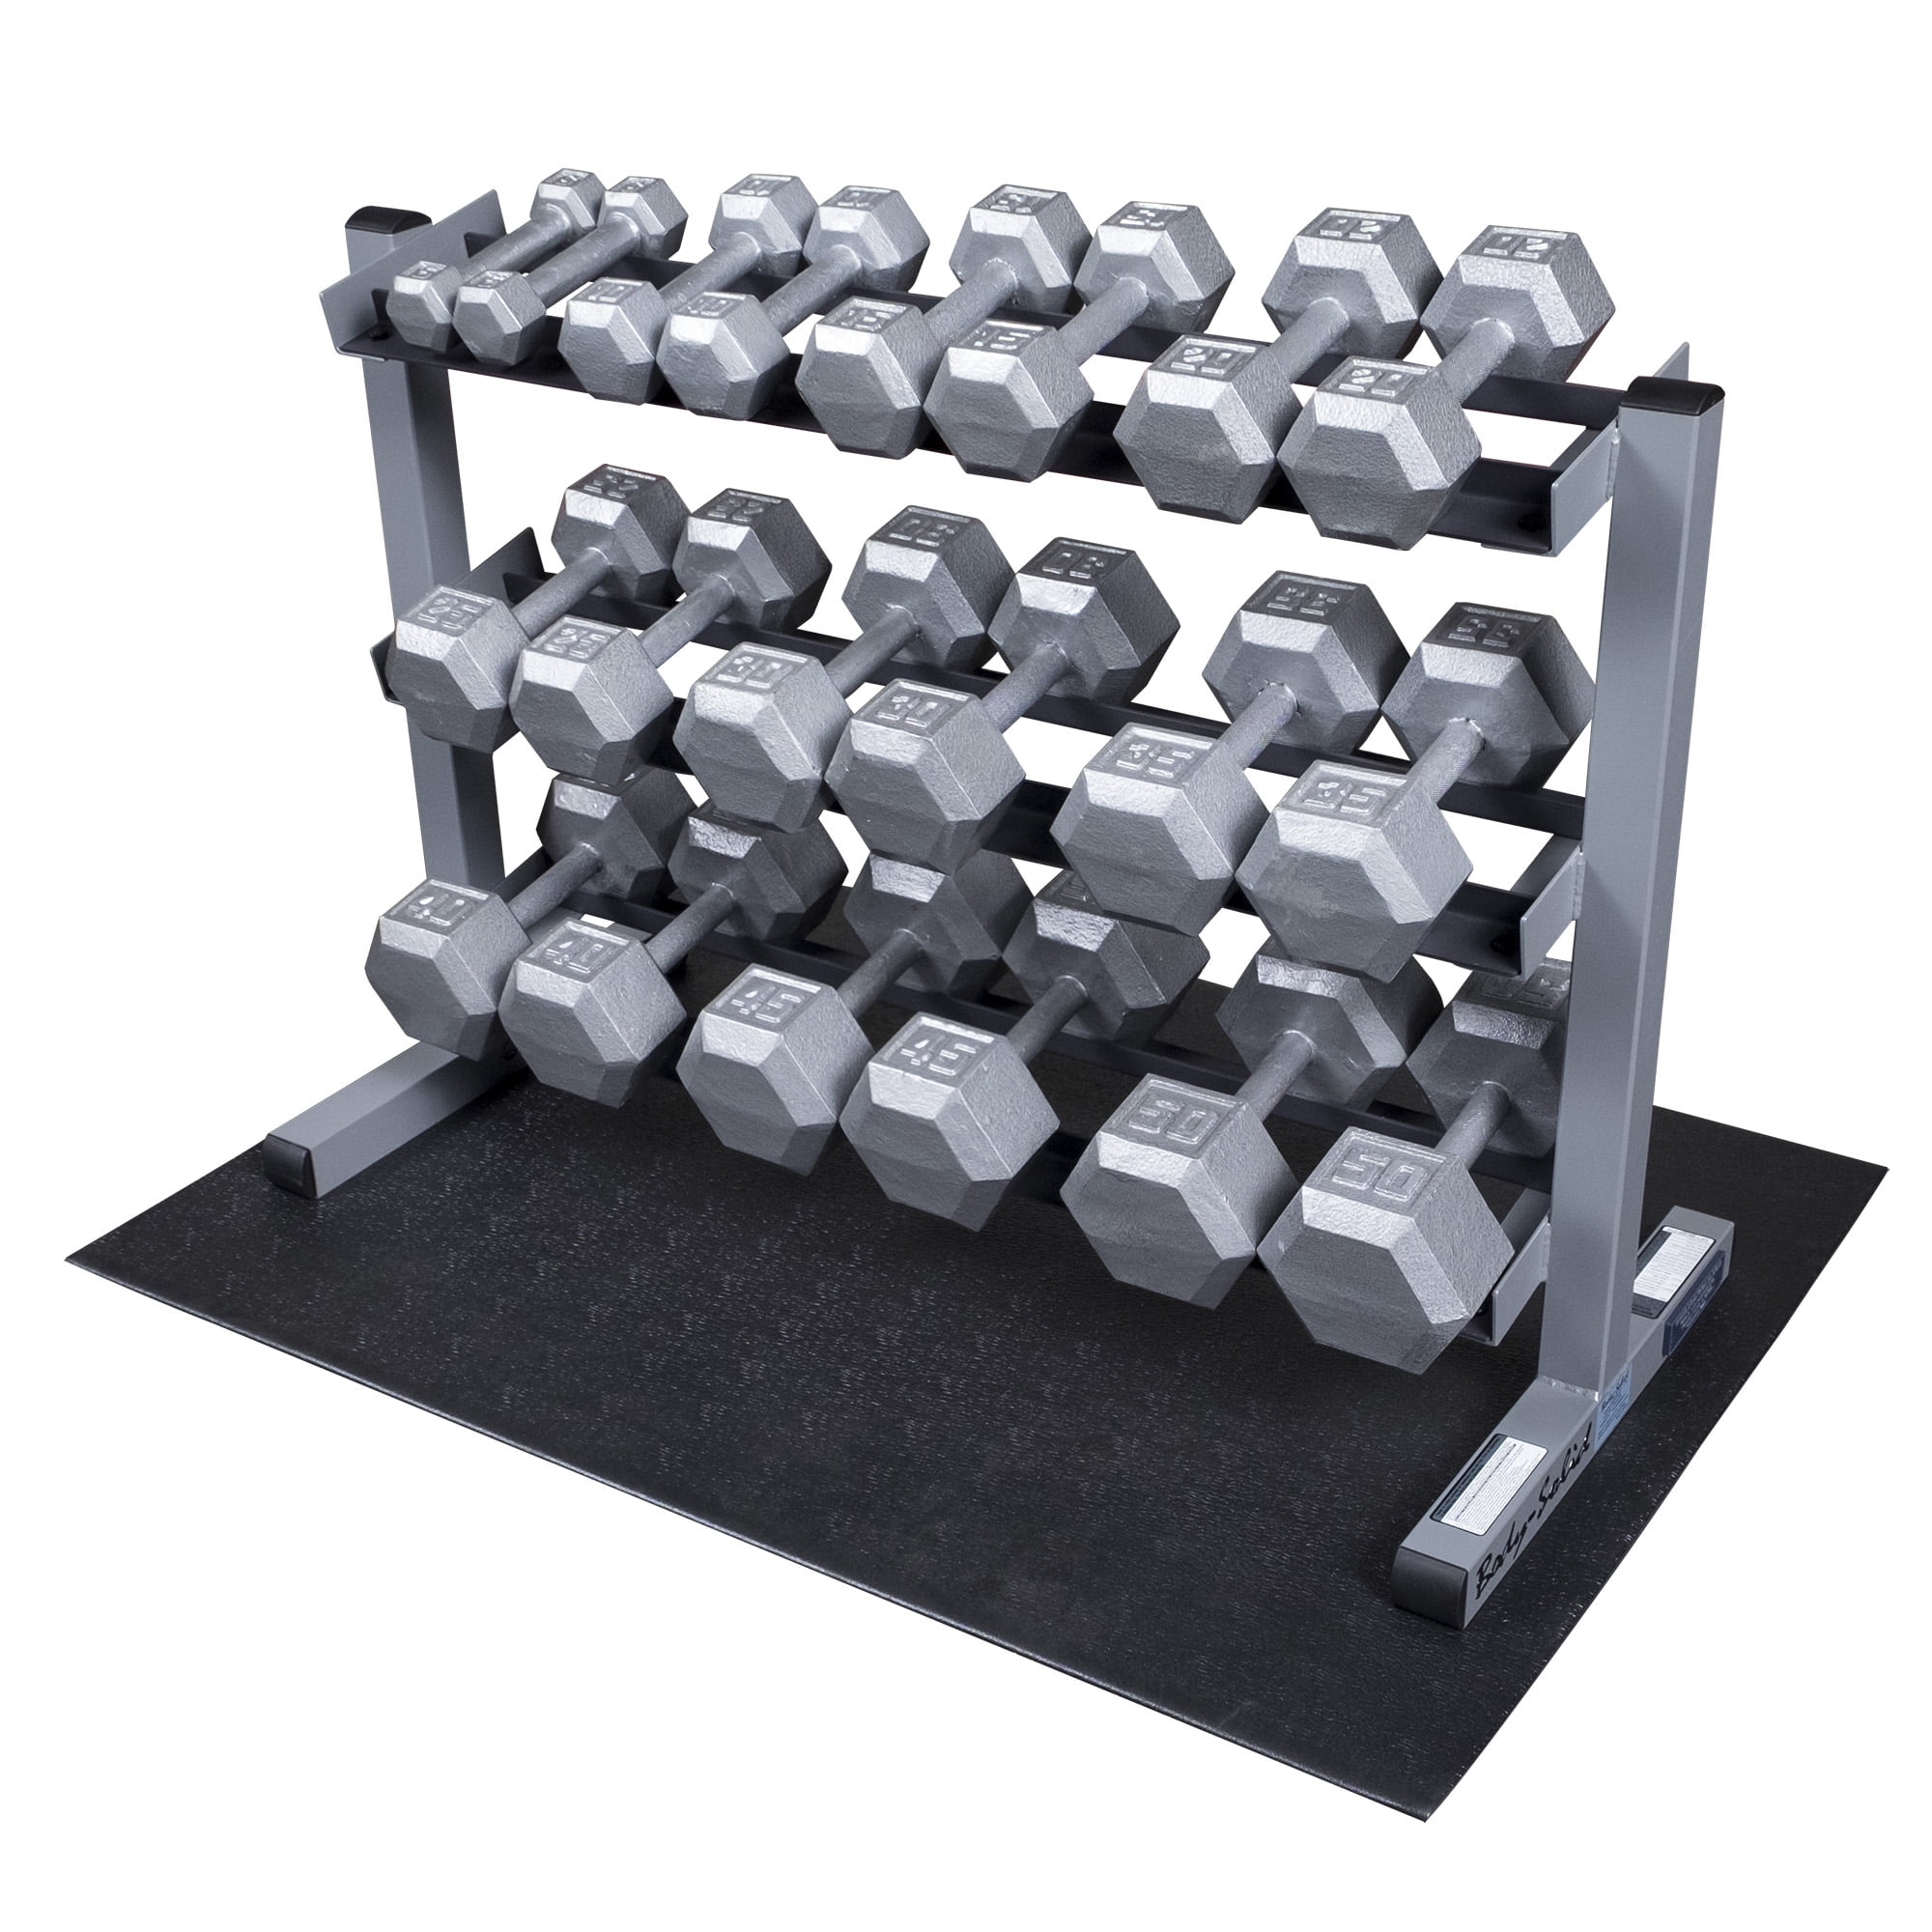  The Rack Workout For Sale for push your ABS